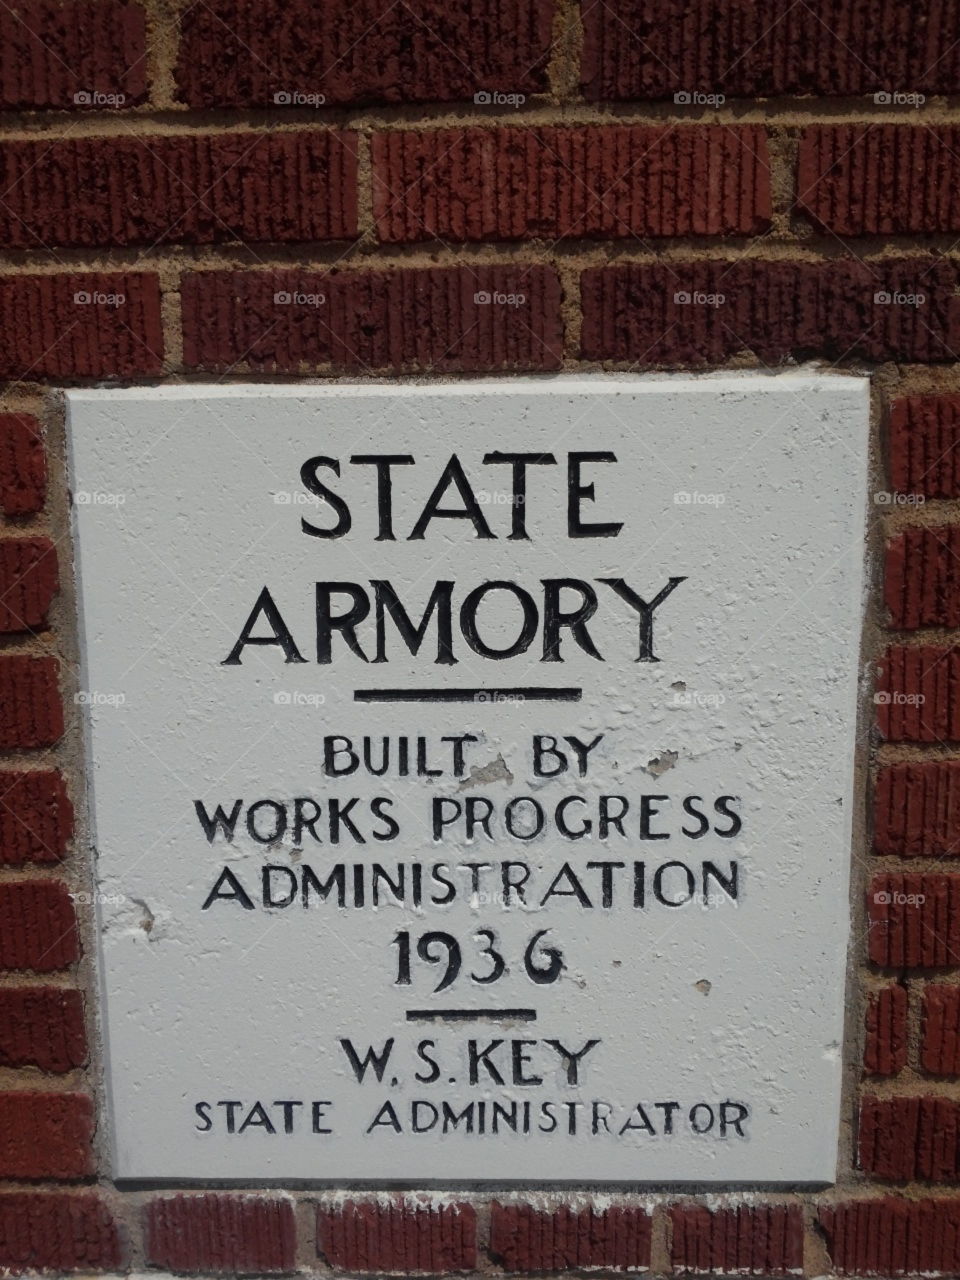 Old Brick Armory Sign-1936
Weatherford, Oklahoma